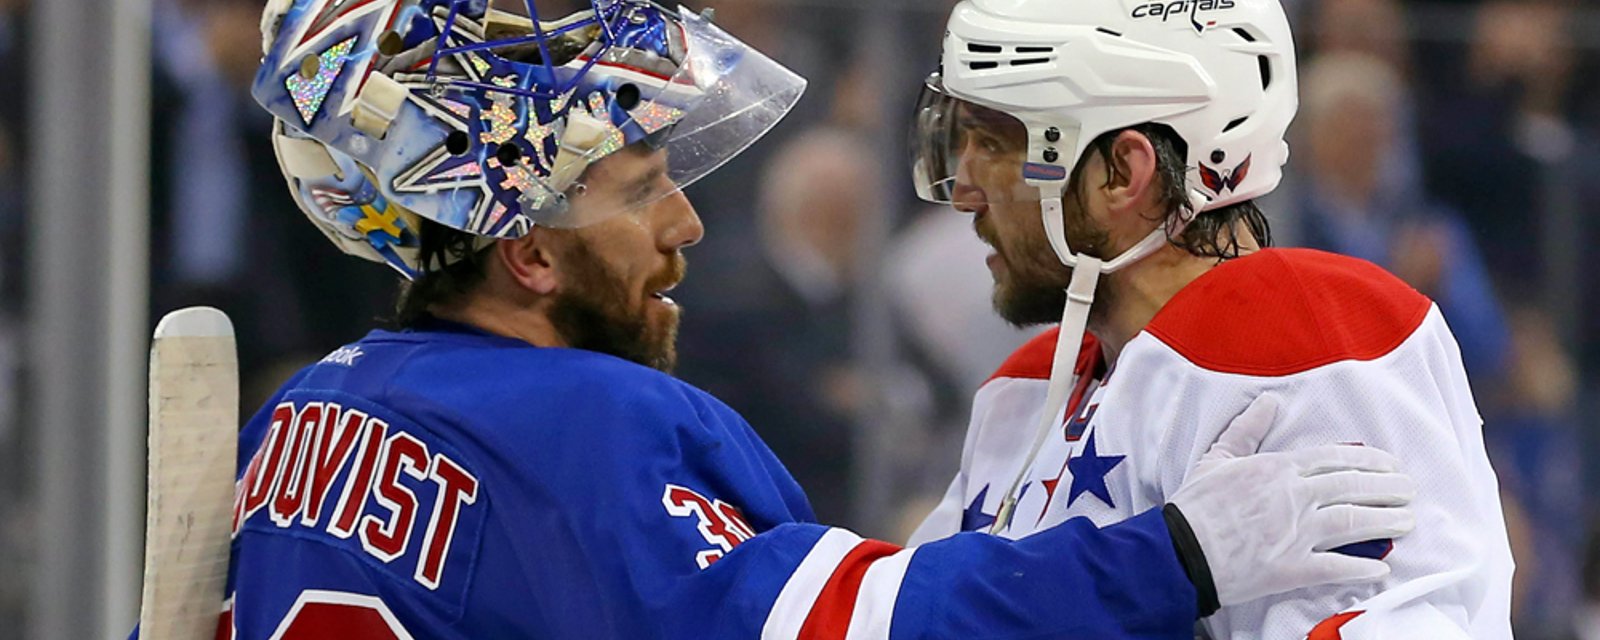 Capitals emerge as clear frontrunners for Lundqvist, per report from Bob McKenzie